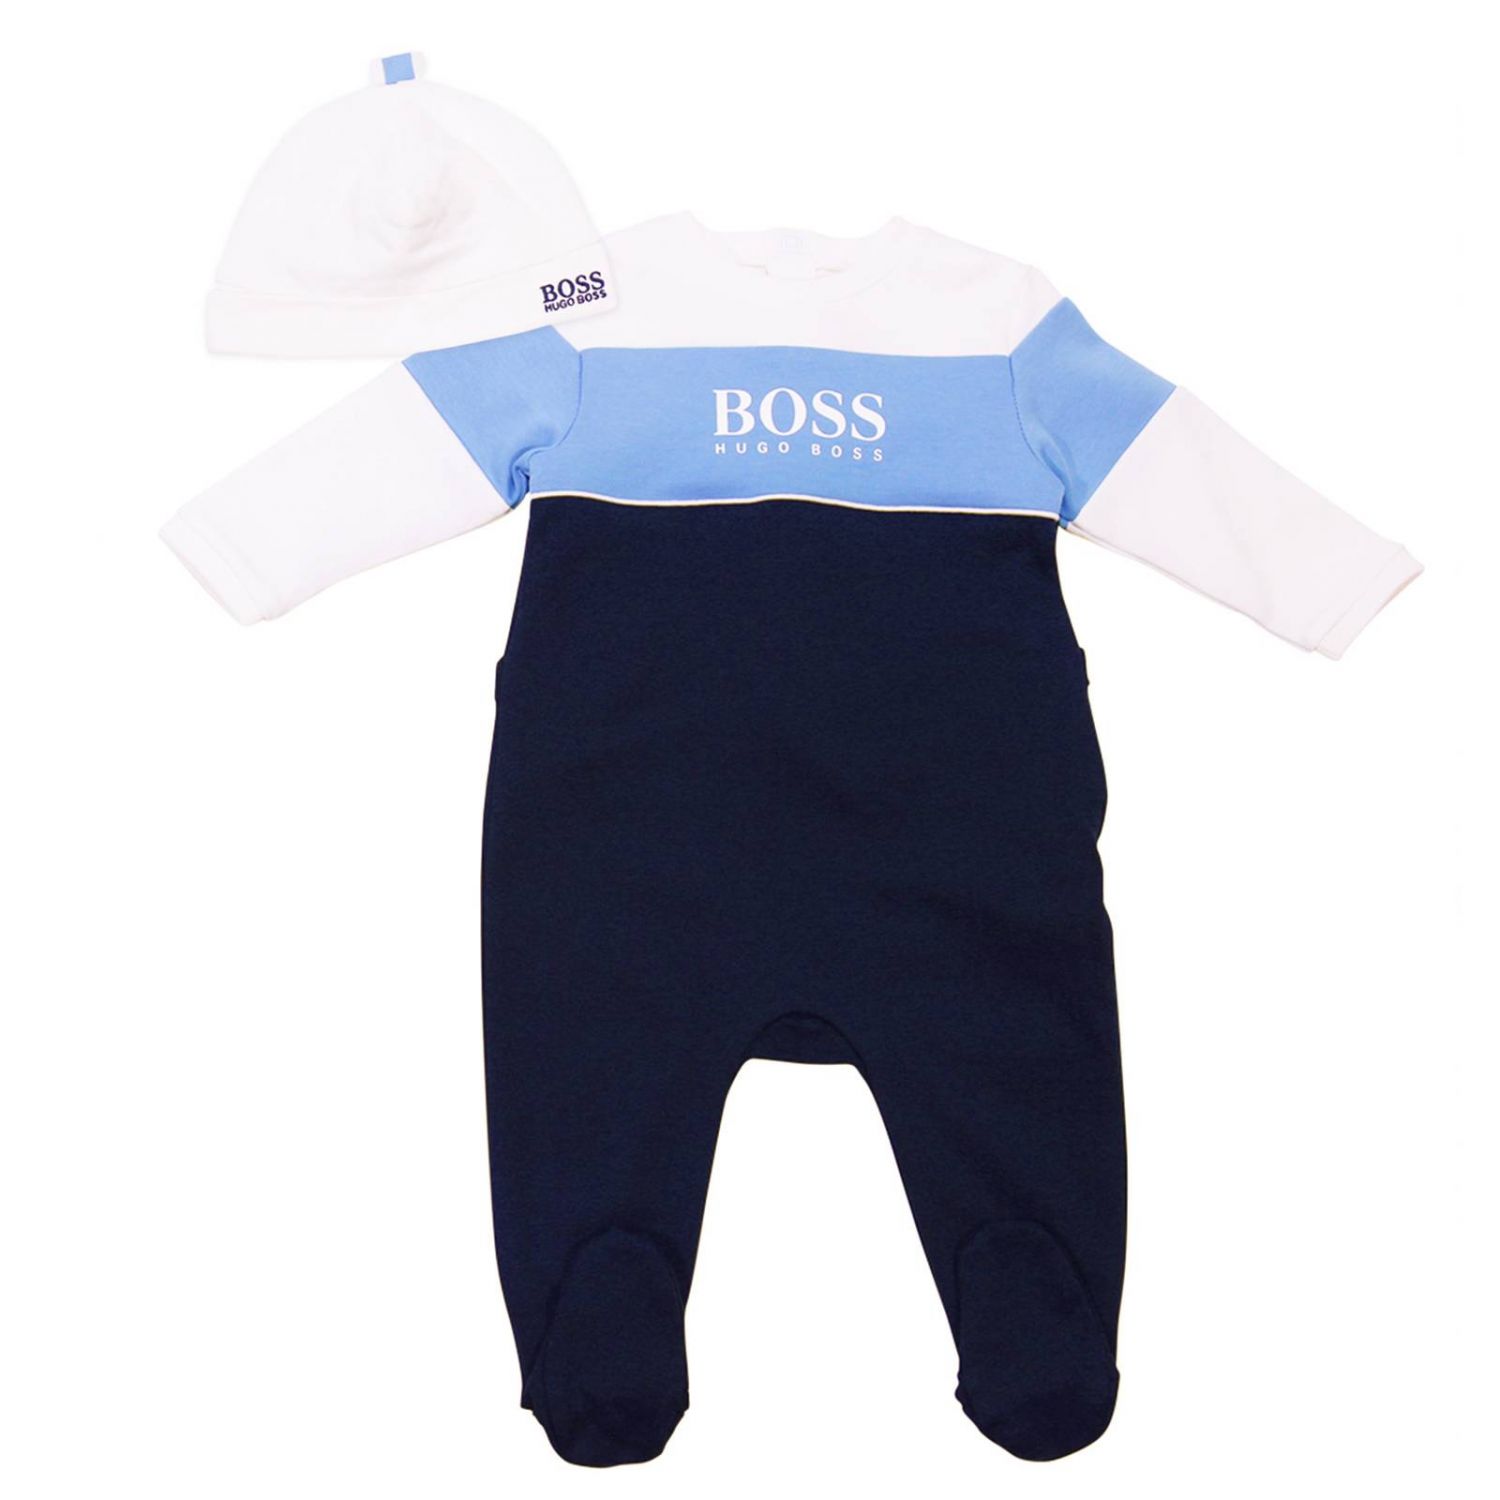 Hugo Boss Outlet: Completo bambino | Completo Hugo Boss Bambino Fantasia |  Completo Hugo Boss J98233 Giglio IT